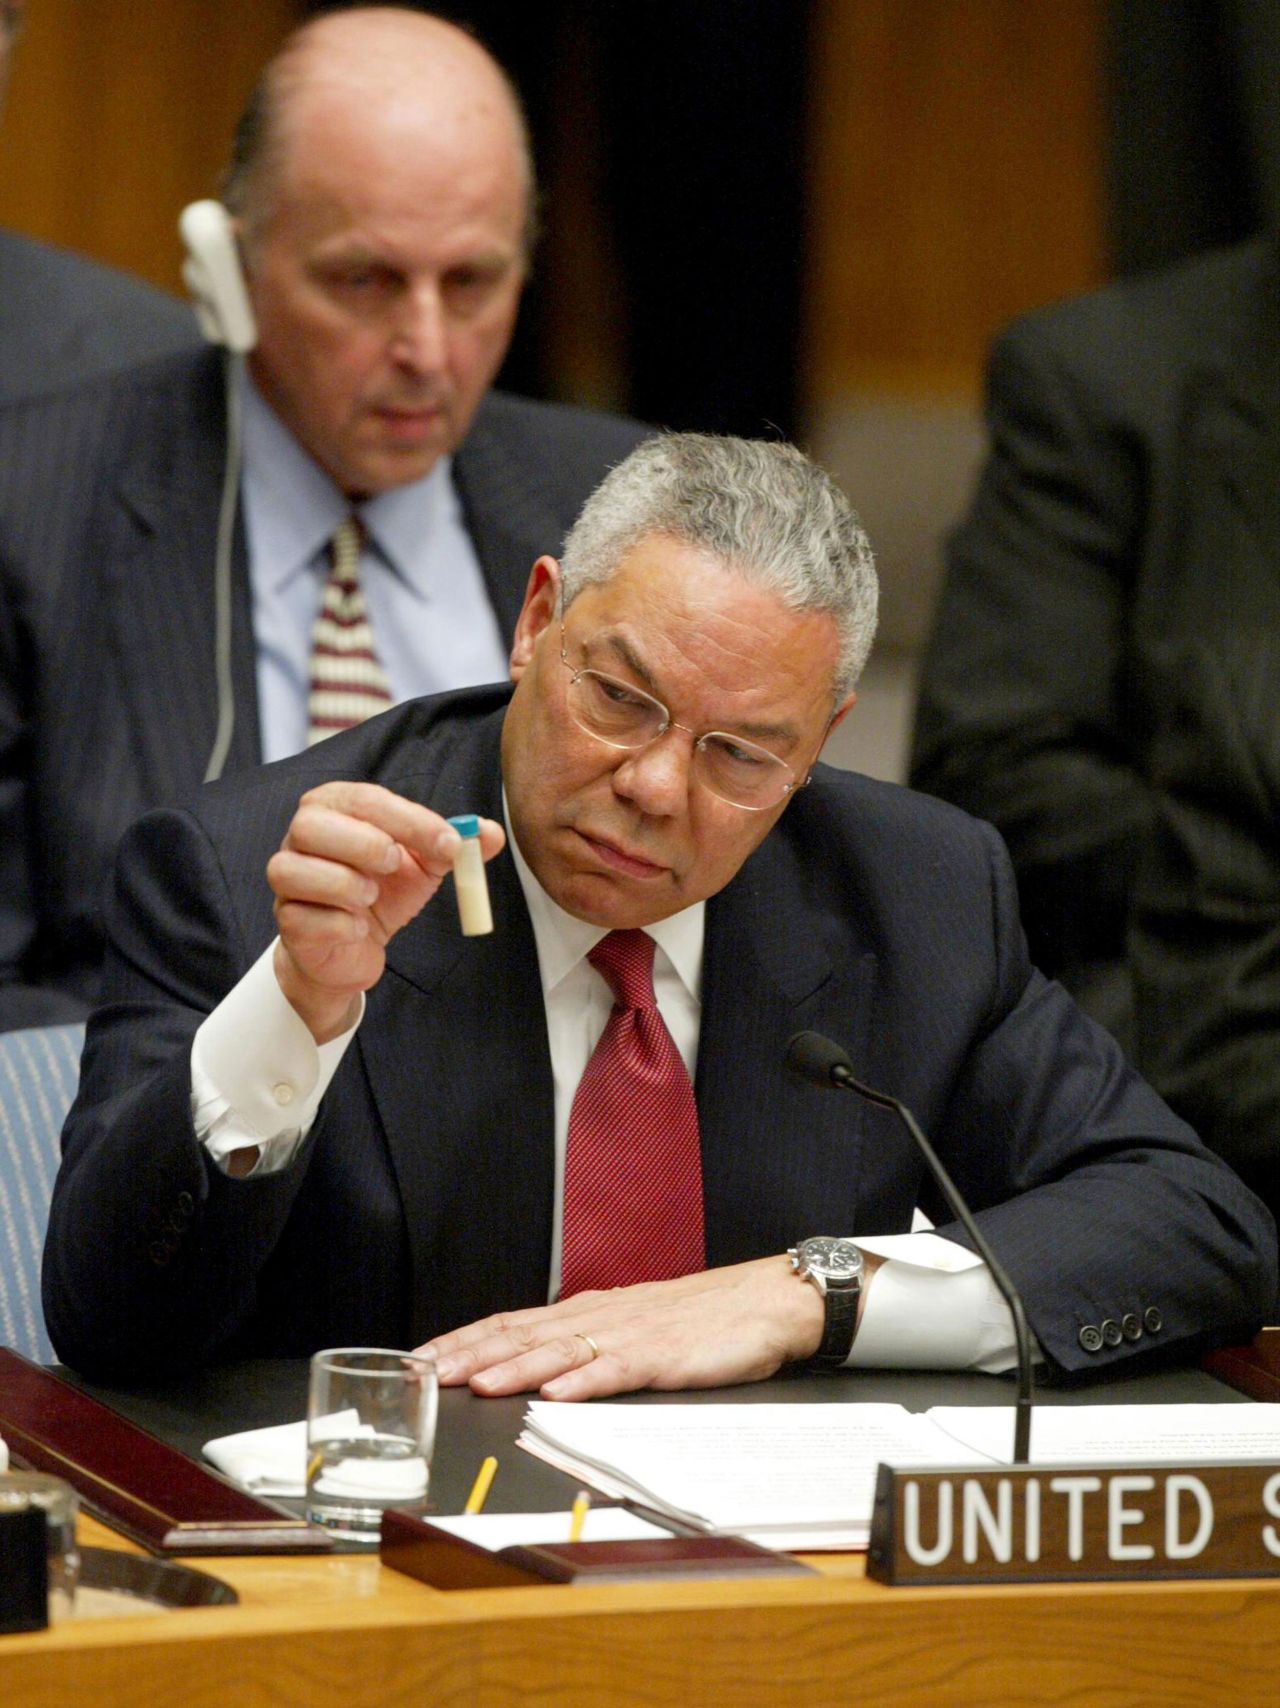 Powell holds up a vial, which he described as one that could contain anthrax, during a speech to the United Nations Security Council in 2003. Powell presented evidence that the US intelligence community said proved Iraq had misled inspectors and hid weapons of mass destruction. "There can be no doubt," Powell warned, "that Saddam Hussein has biological weapons and the capability to rapidly produce more, many more." The United States went to war with Iraq just six weeks after Powell's speech. Inspectors, however, later found no such weaponry in Iraq, and two years after Powell's UN speech, a government report said the intelligence community was "dead wrong" in its assessments of Iraq's weapons of mass destruction capabilities. Powell later called his UN speech a "blot" that will forever be on his record. "The event will earn a prominent paragraph in my obituary," Powell wrote in his 2012 memoir.